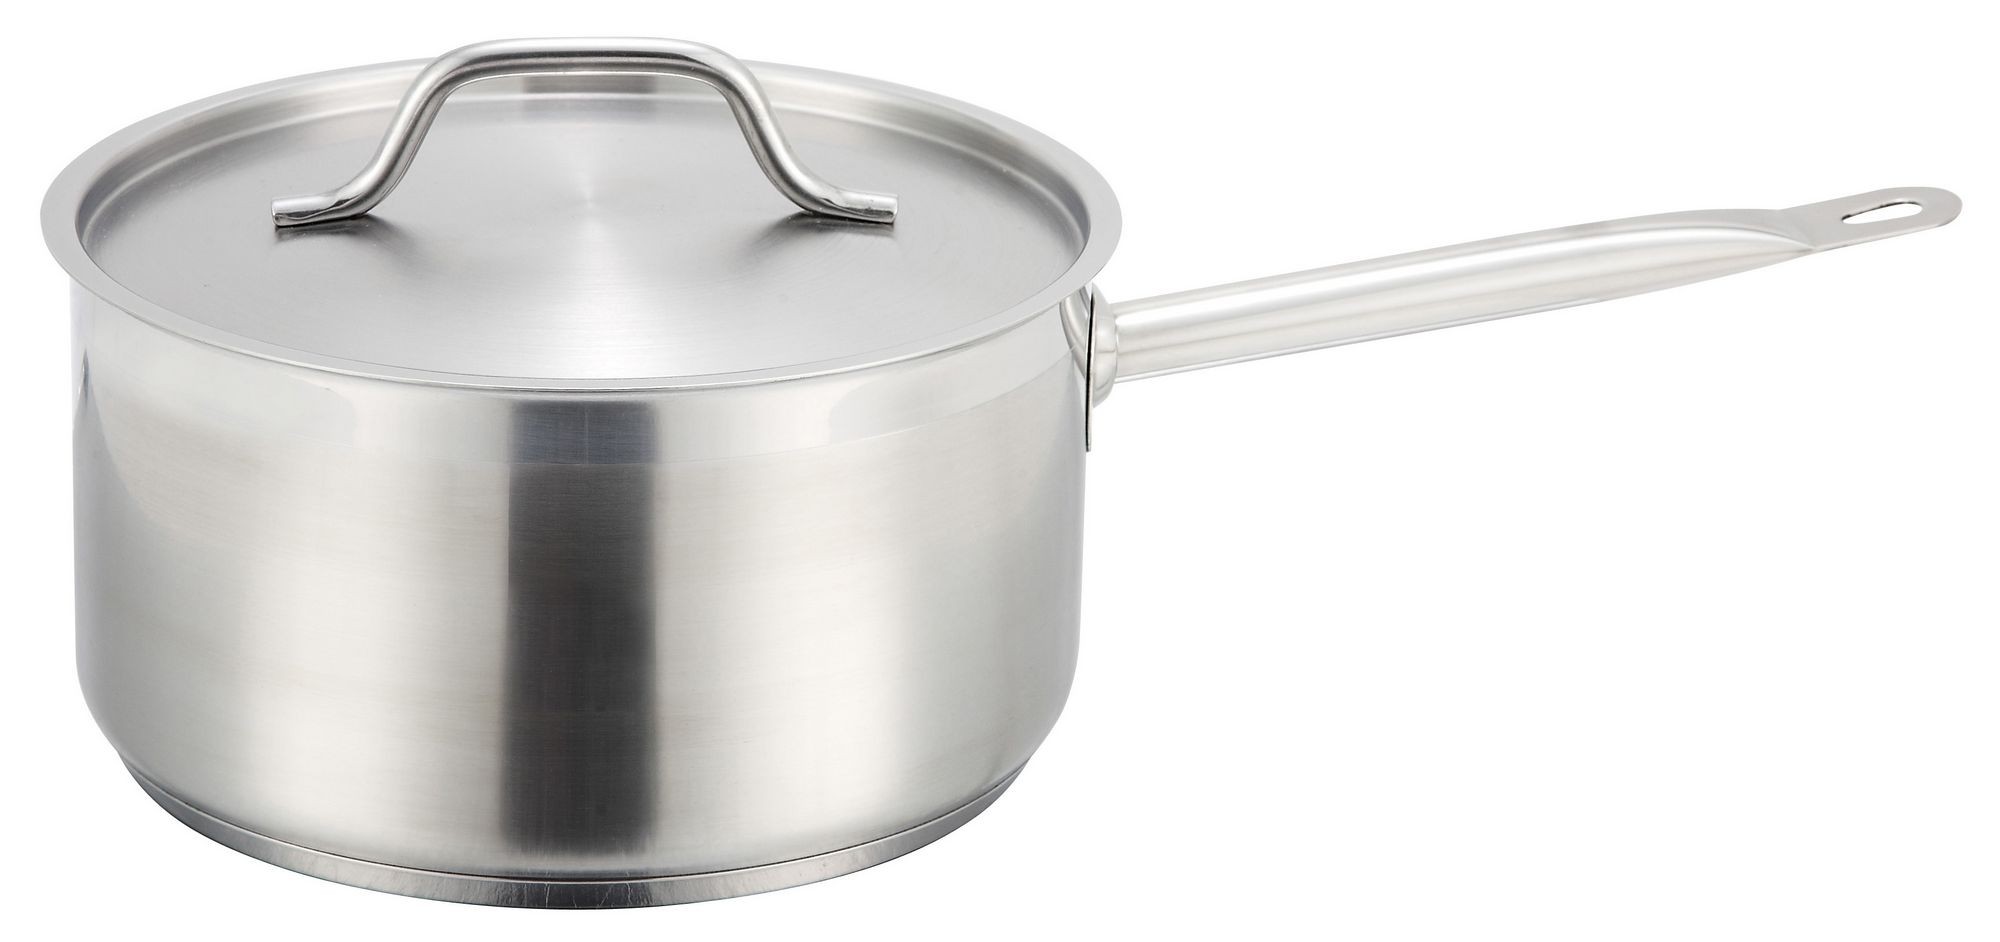 Winco SSSP-3 Premium Induction Stainless Steel 3-1/2 Qt. Sauce Pan with Cover